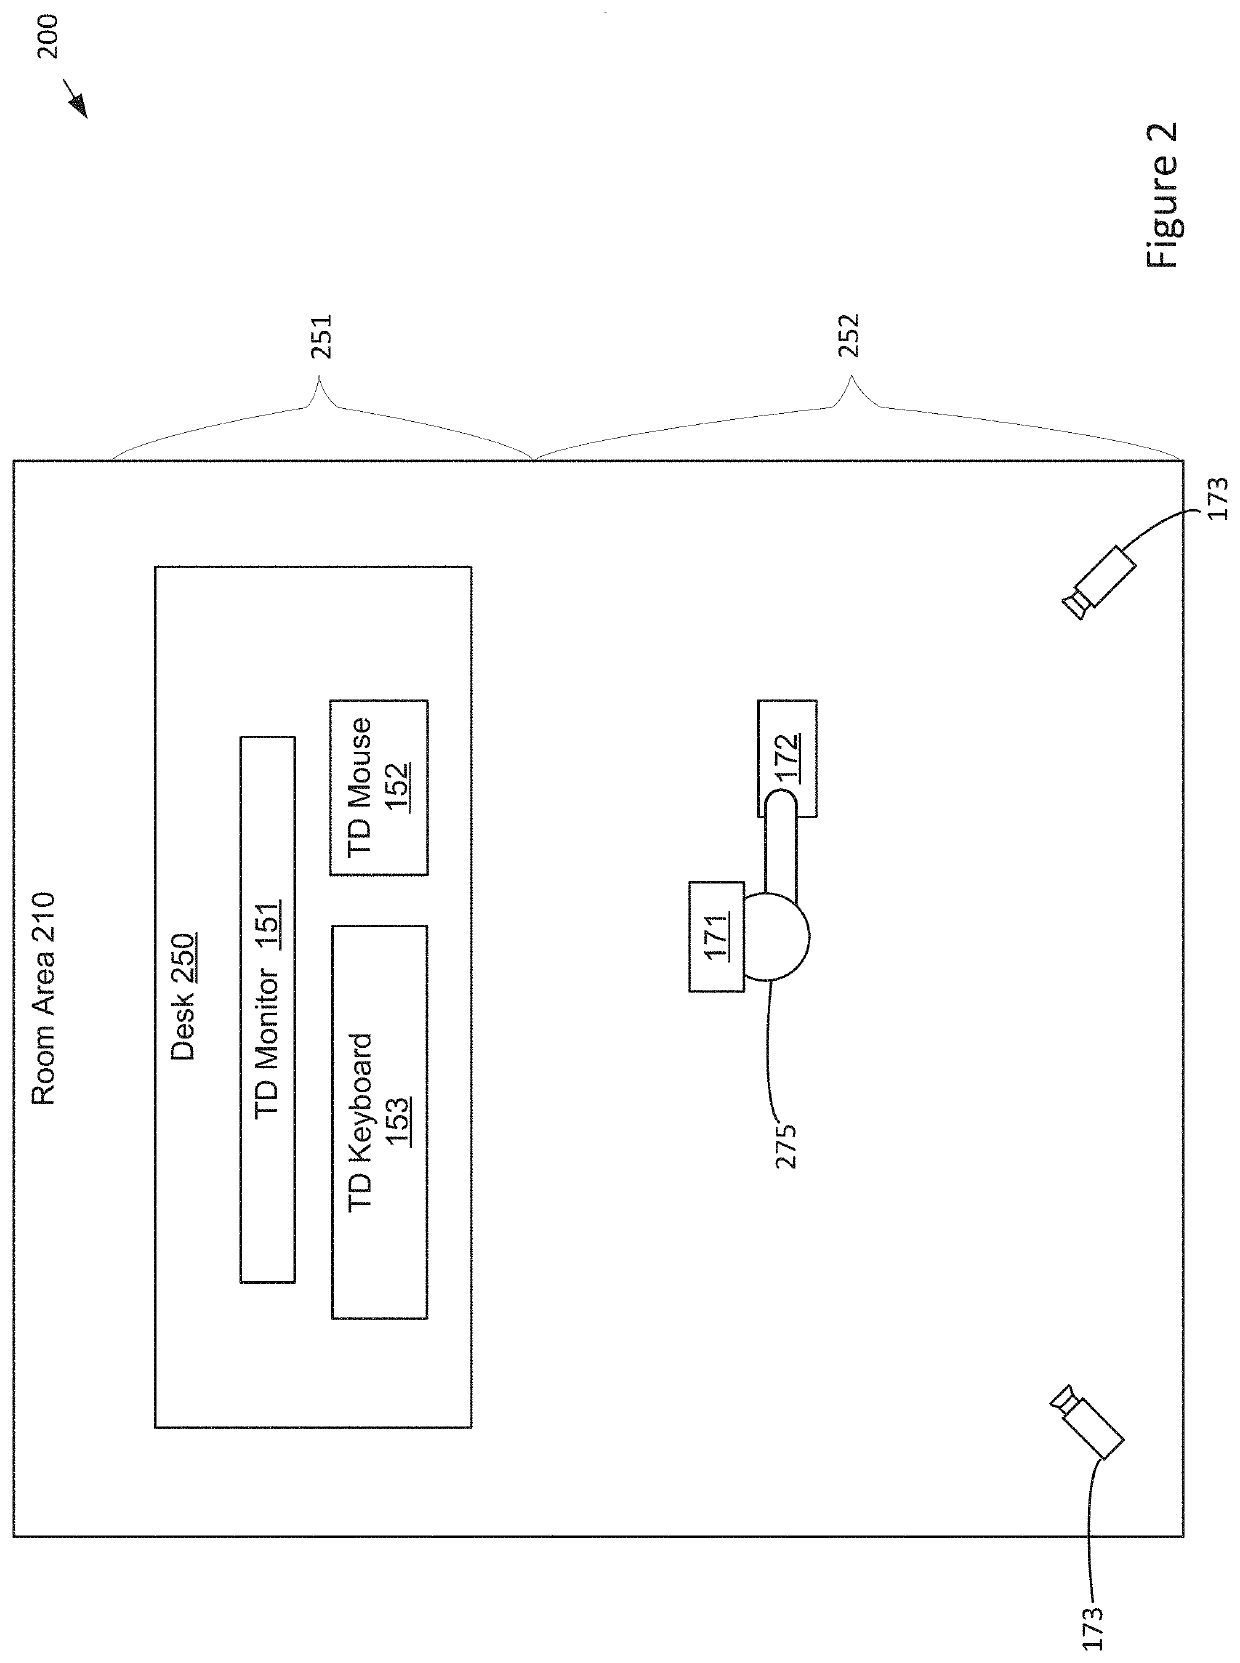 Transitions between states in a hybrid virtual reality desktop computing environment